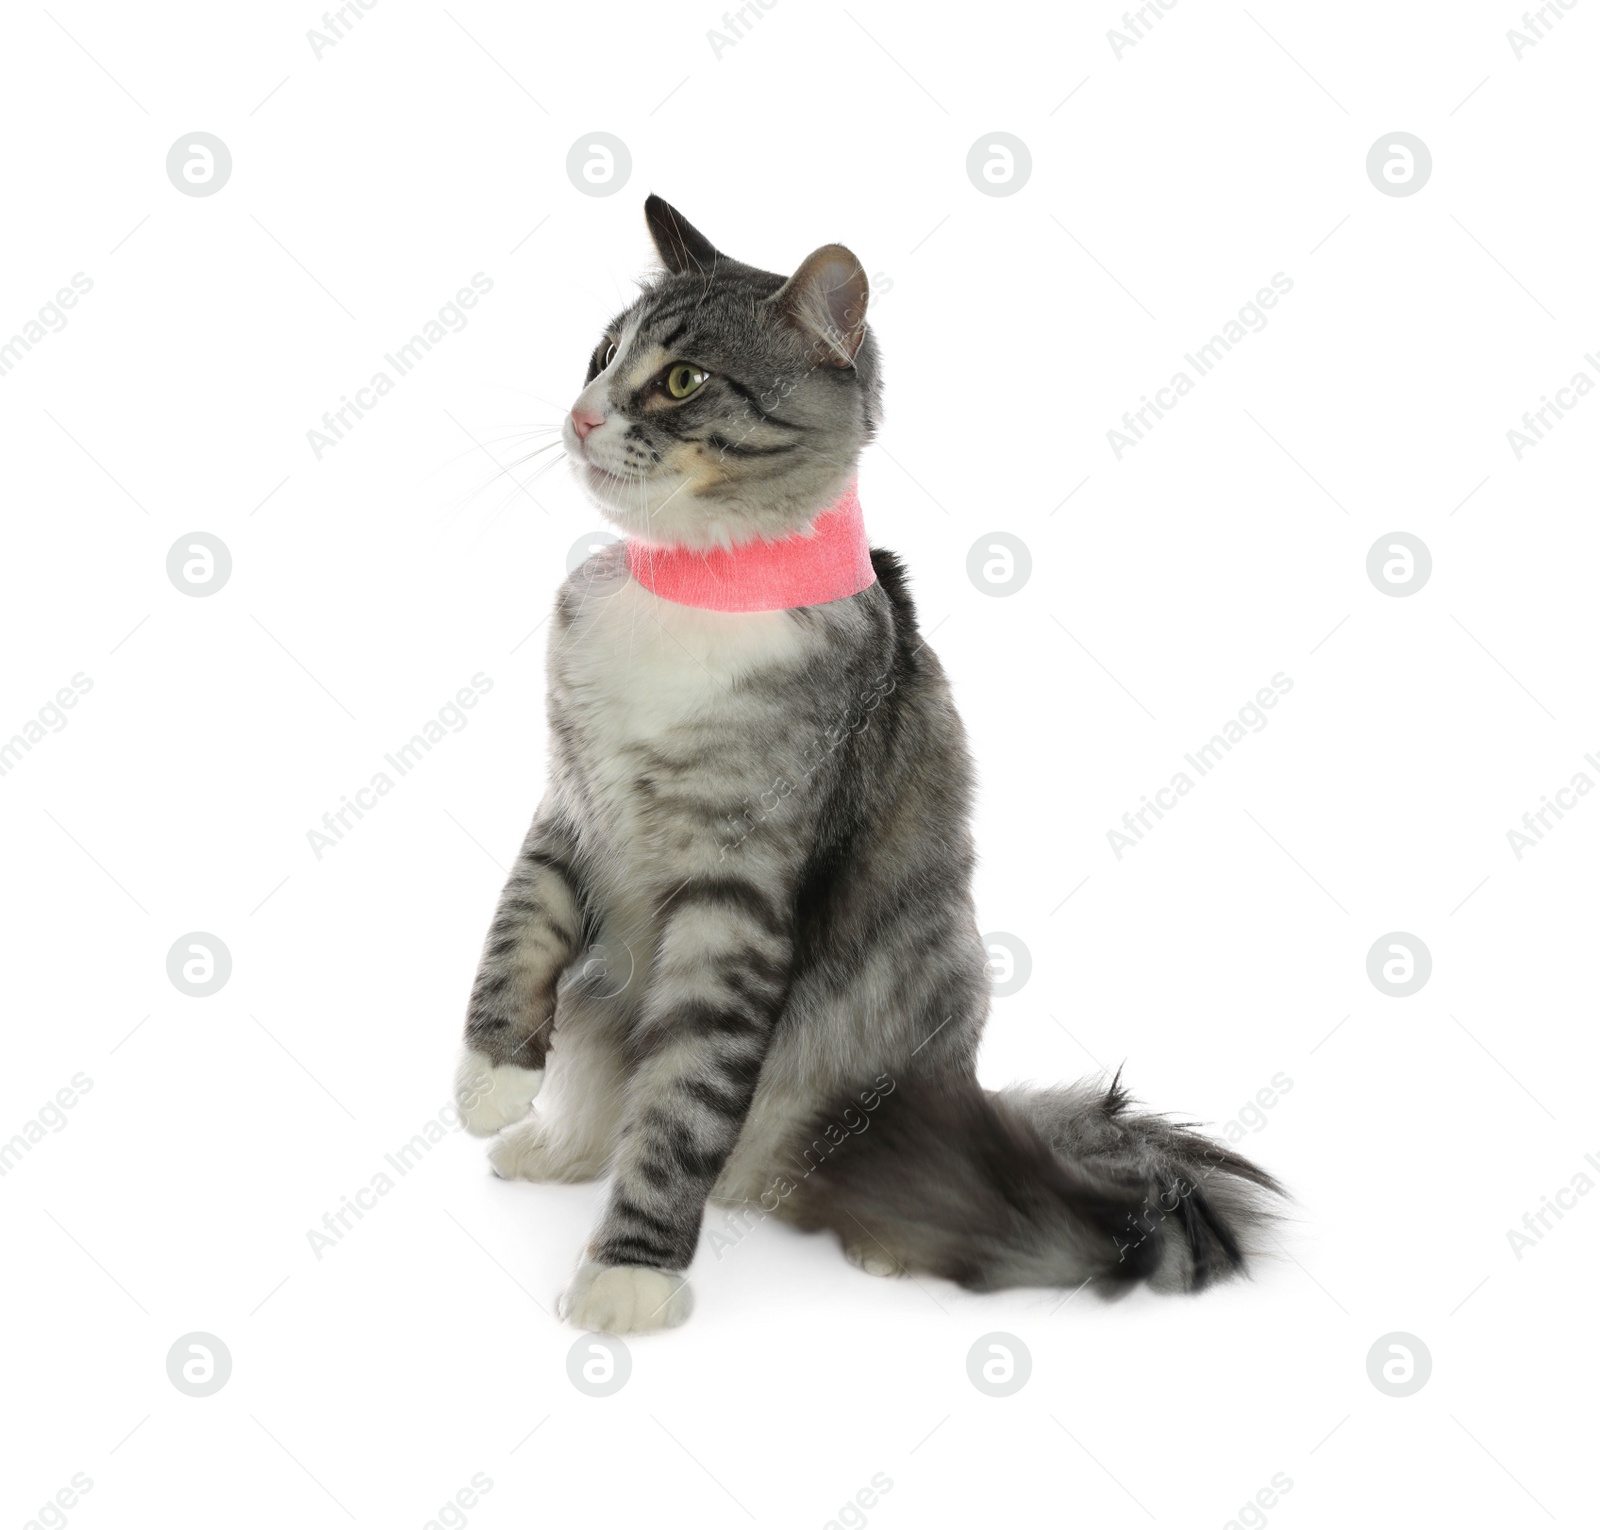 Photo of Cute cat with pink medical bandage wrapped around neck on white background